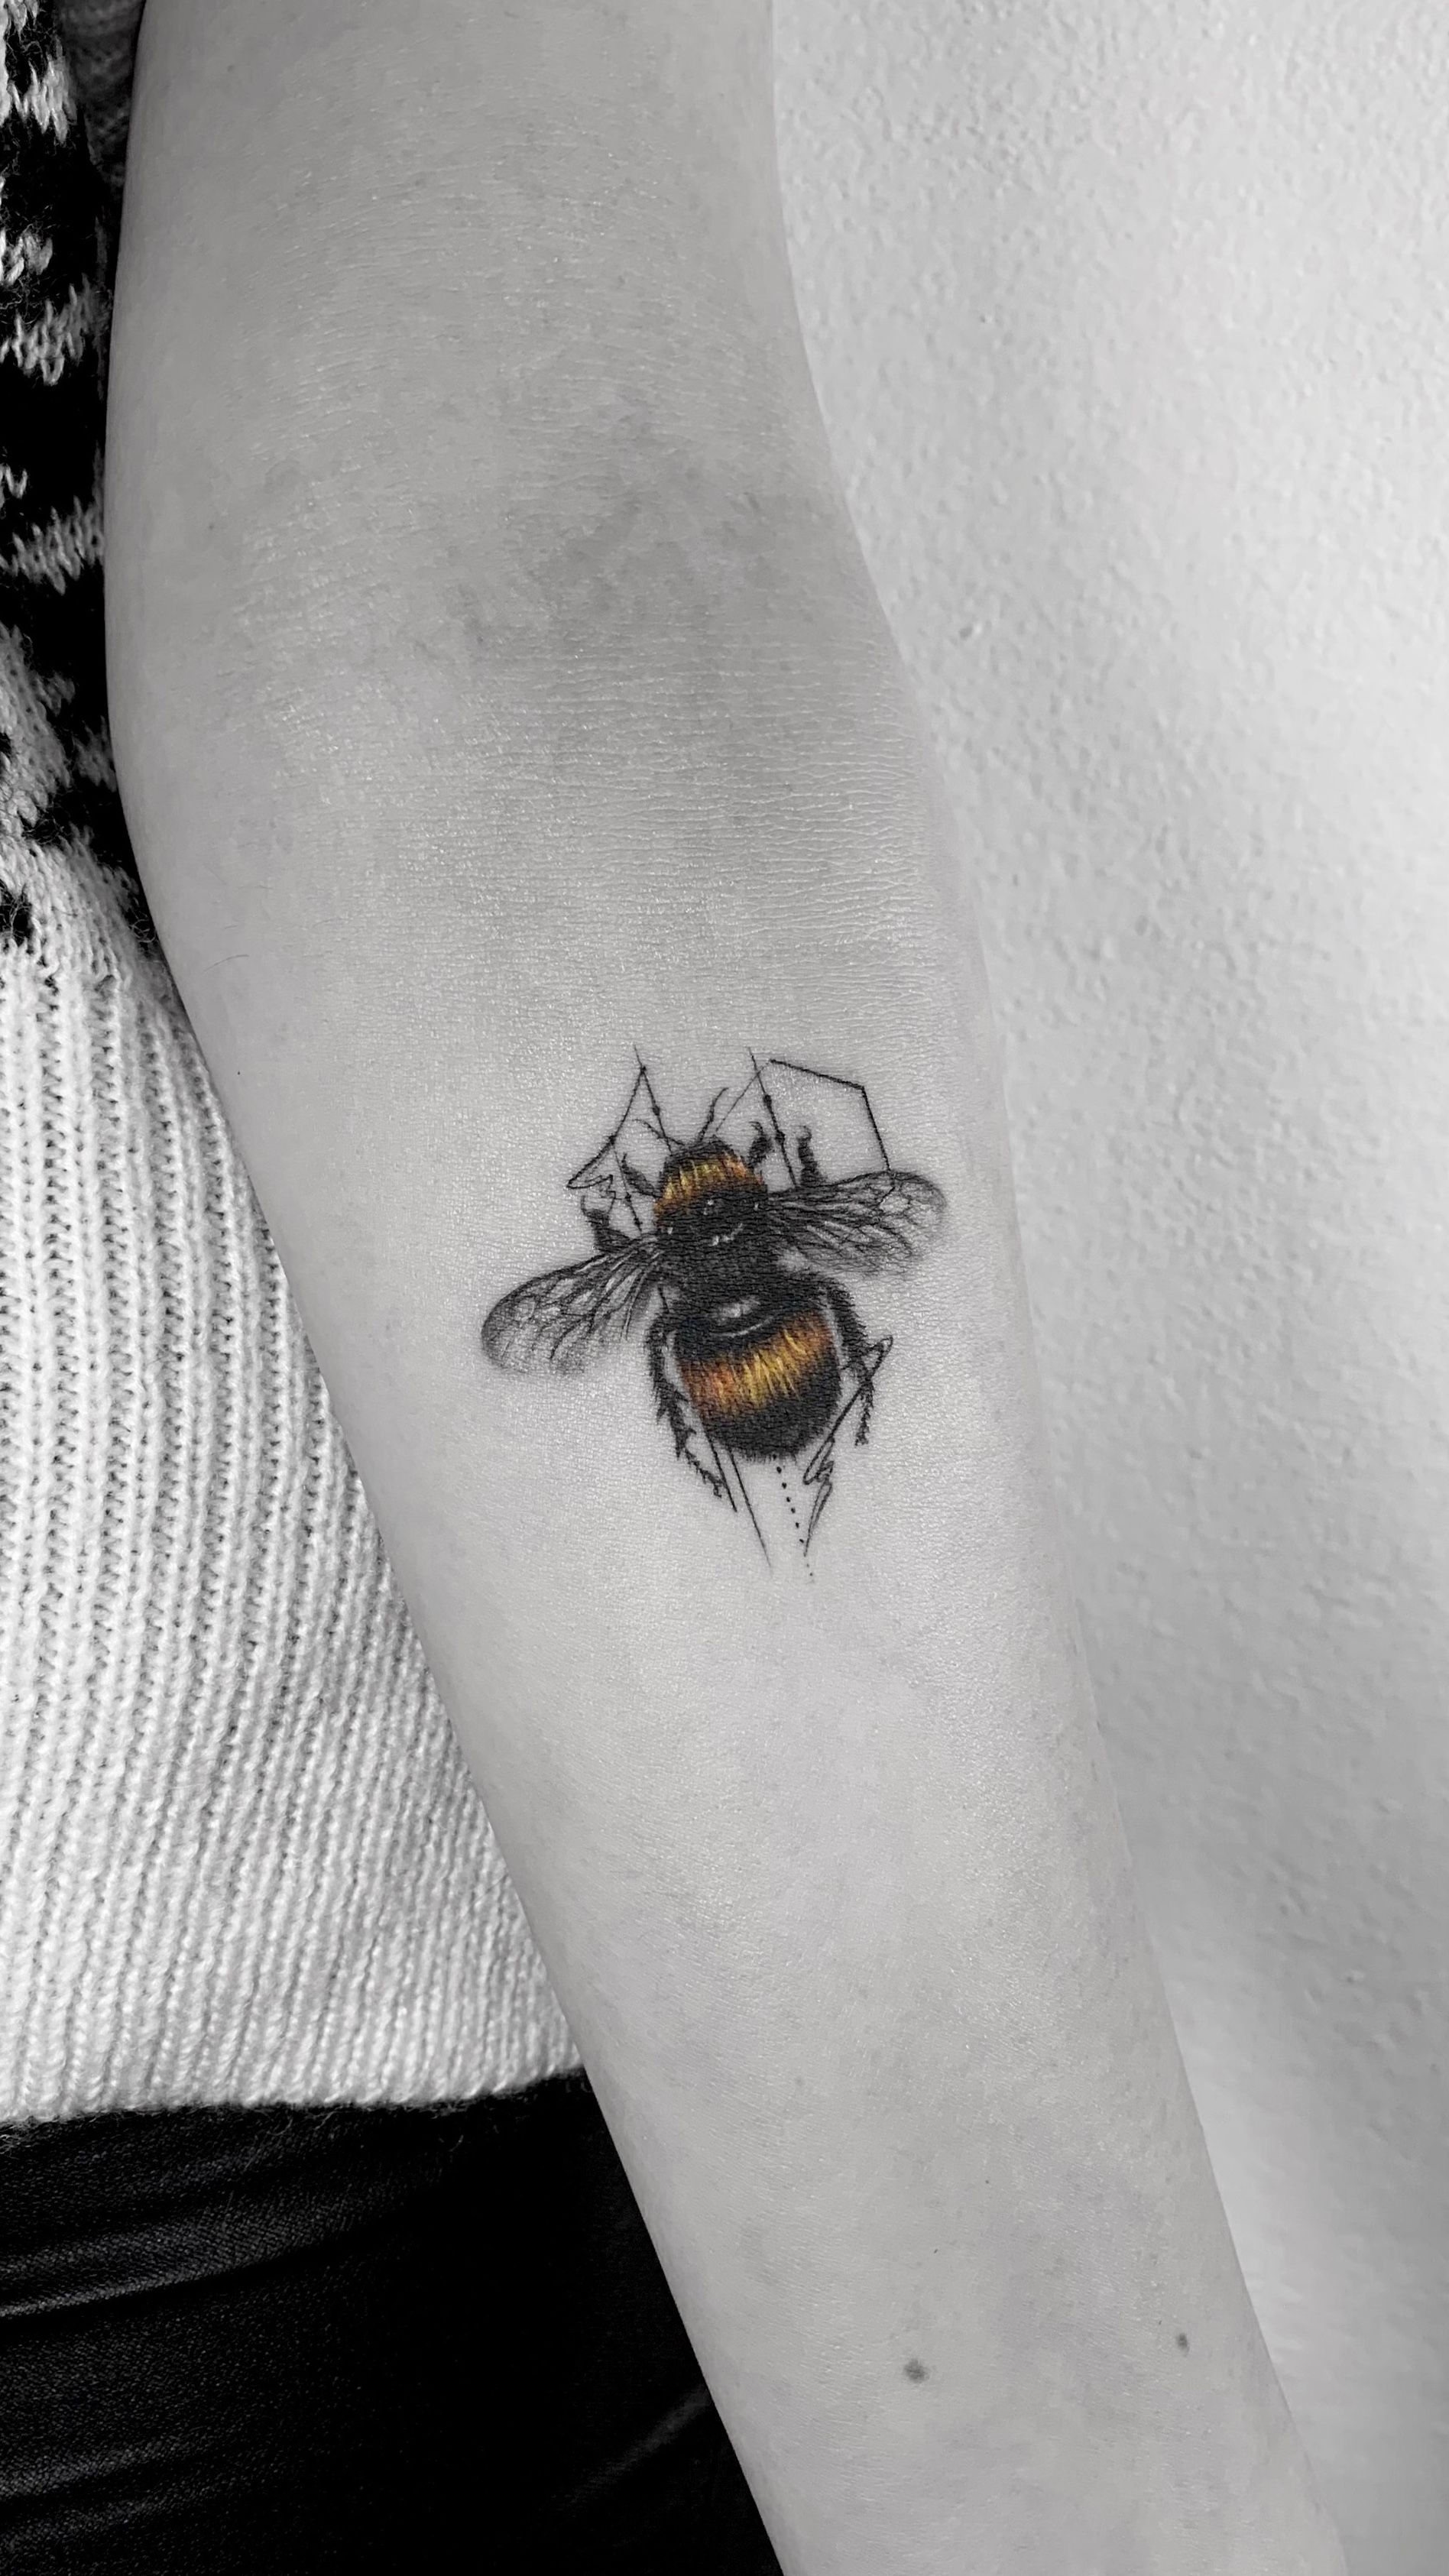 A happy bumble bee 🐝 first tattoo 🍒 | Instagram